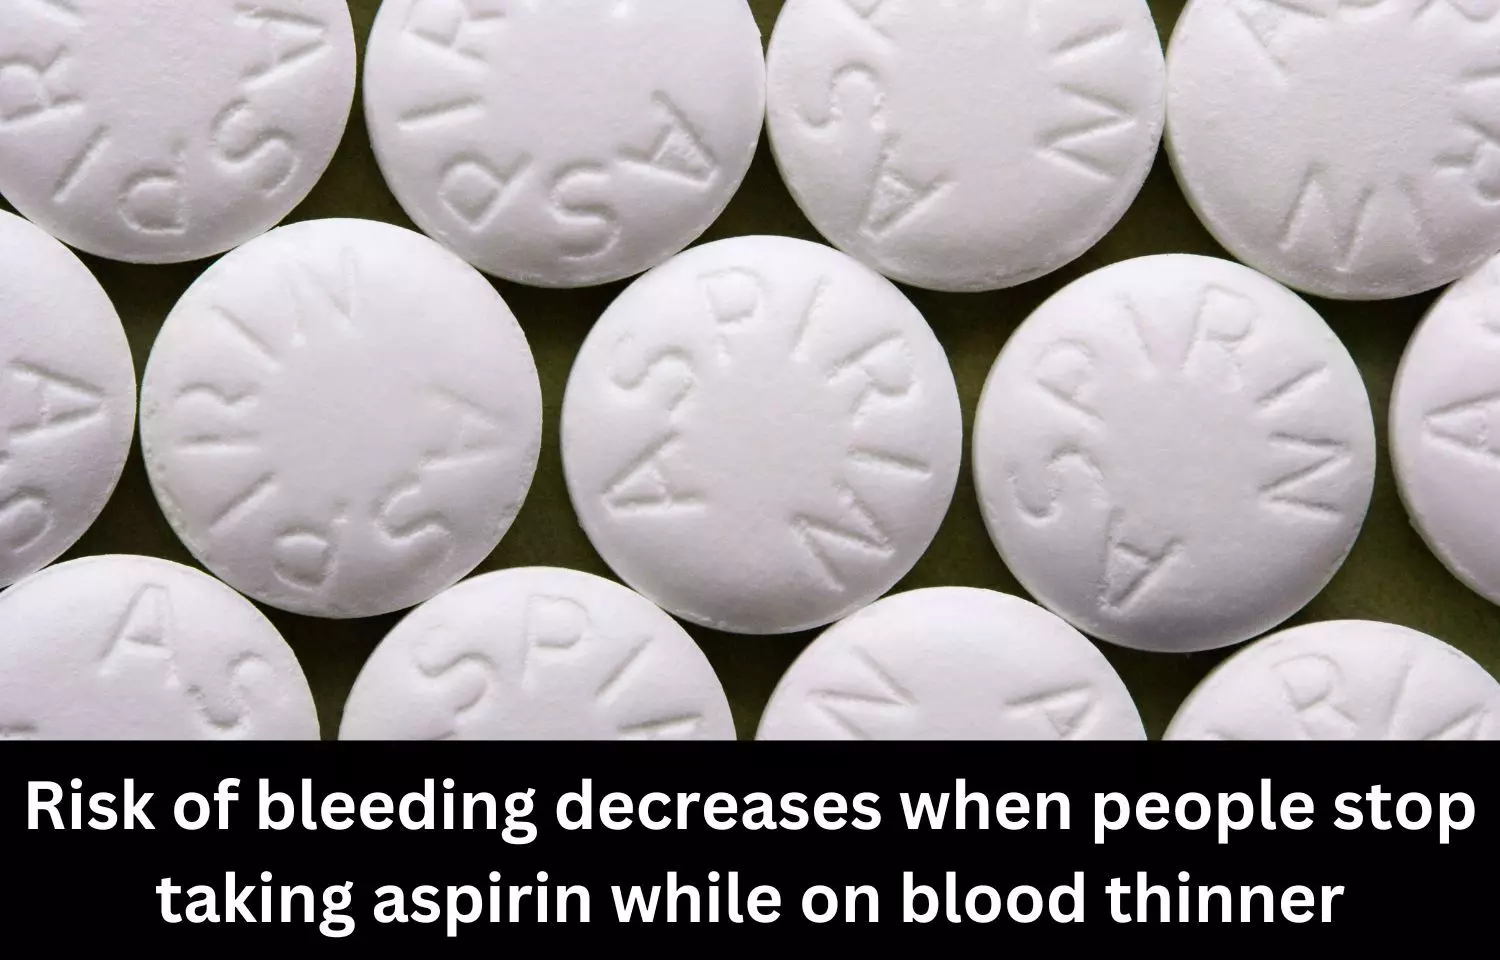 Risk of bleeding decreases when people stop taking aspirin while on blood thinner, says Study